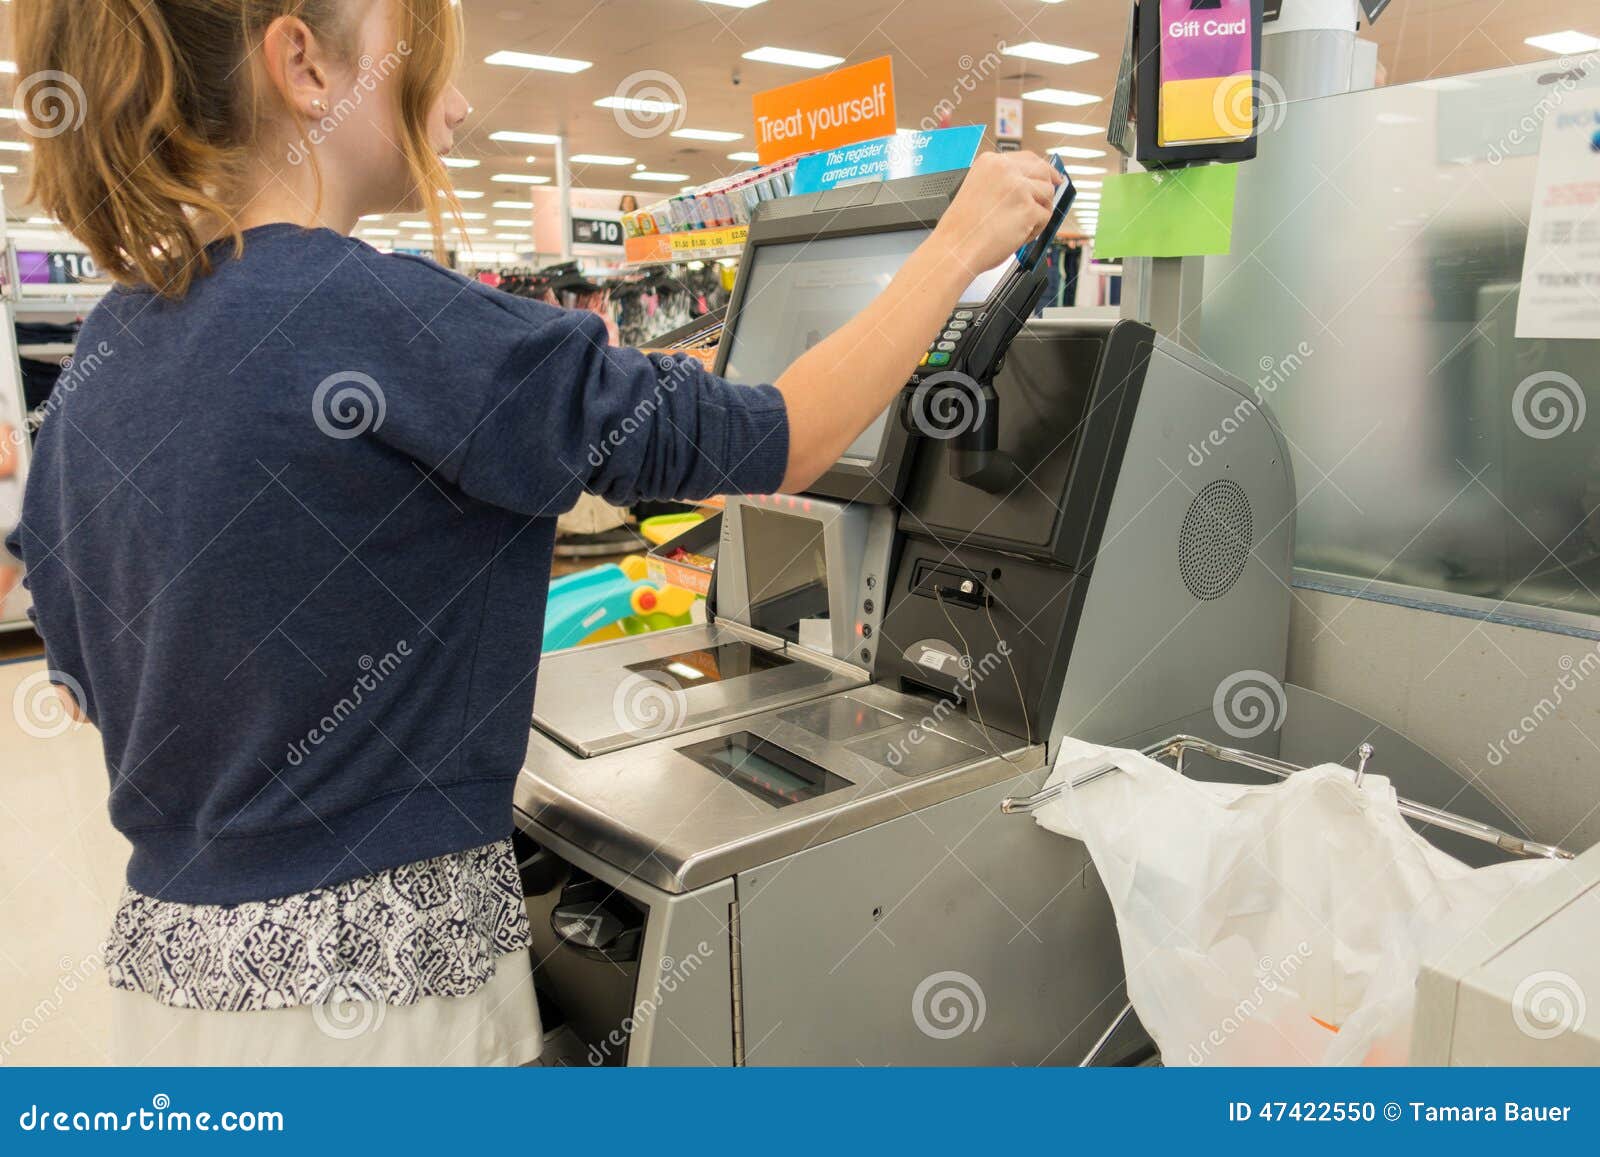 shopper, self checkout at department store